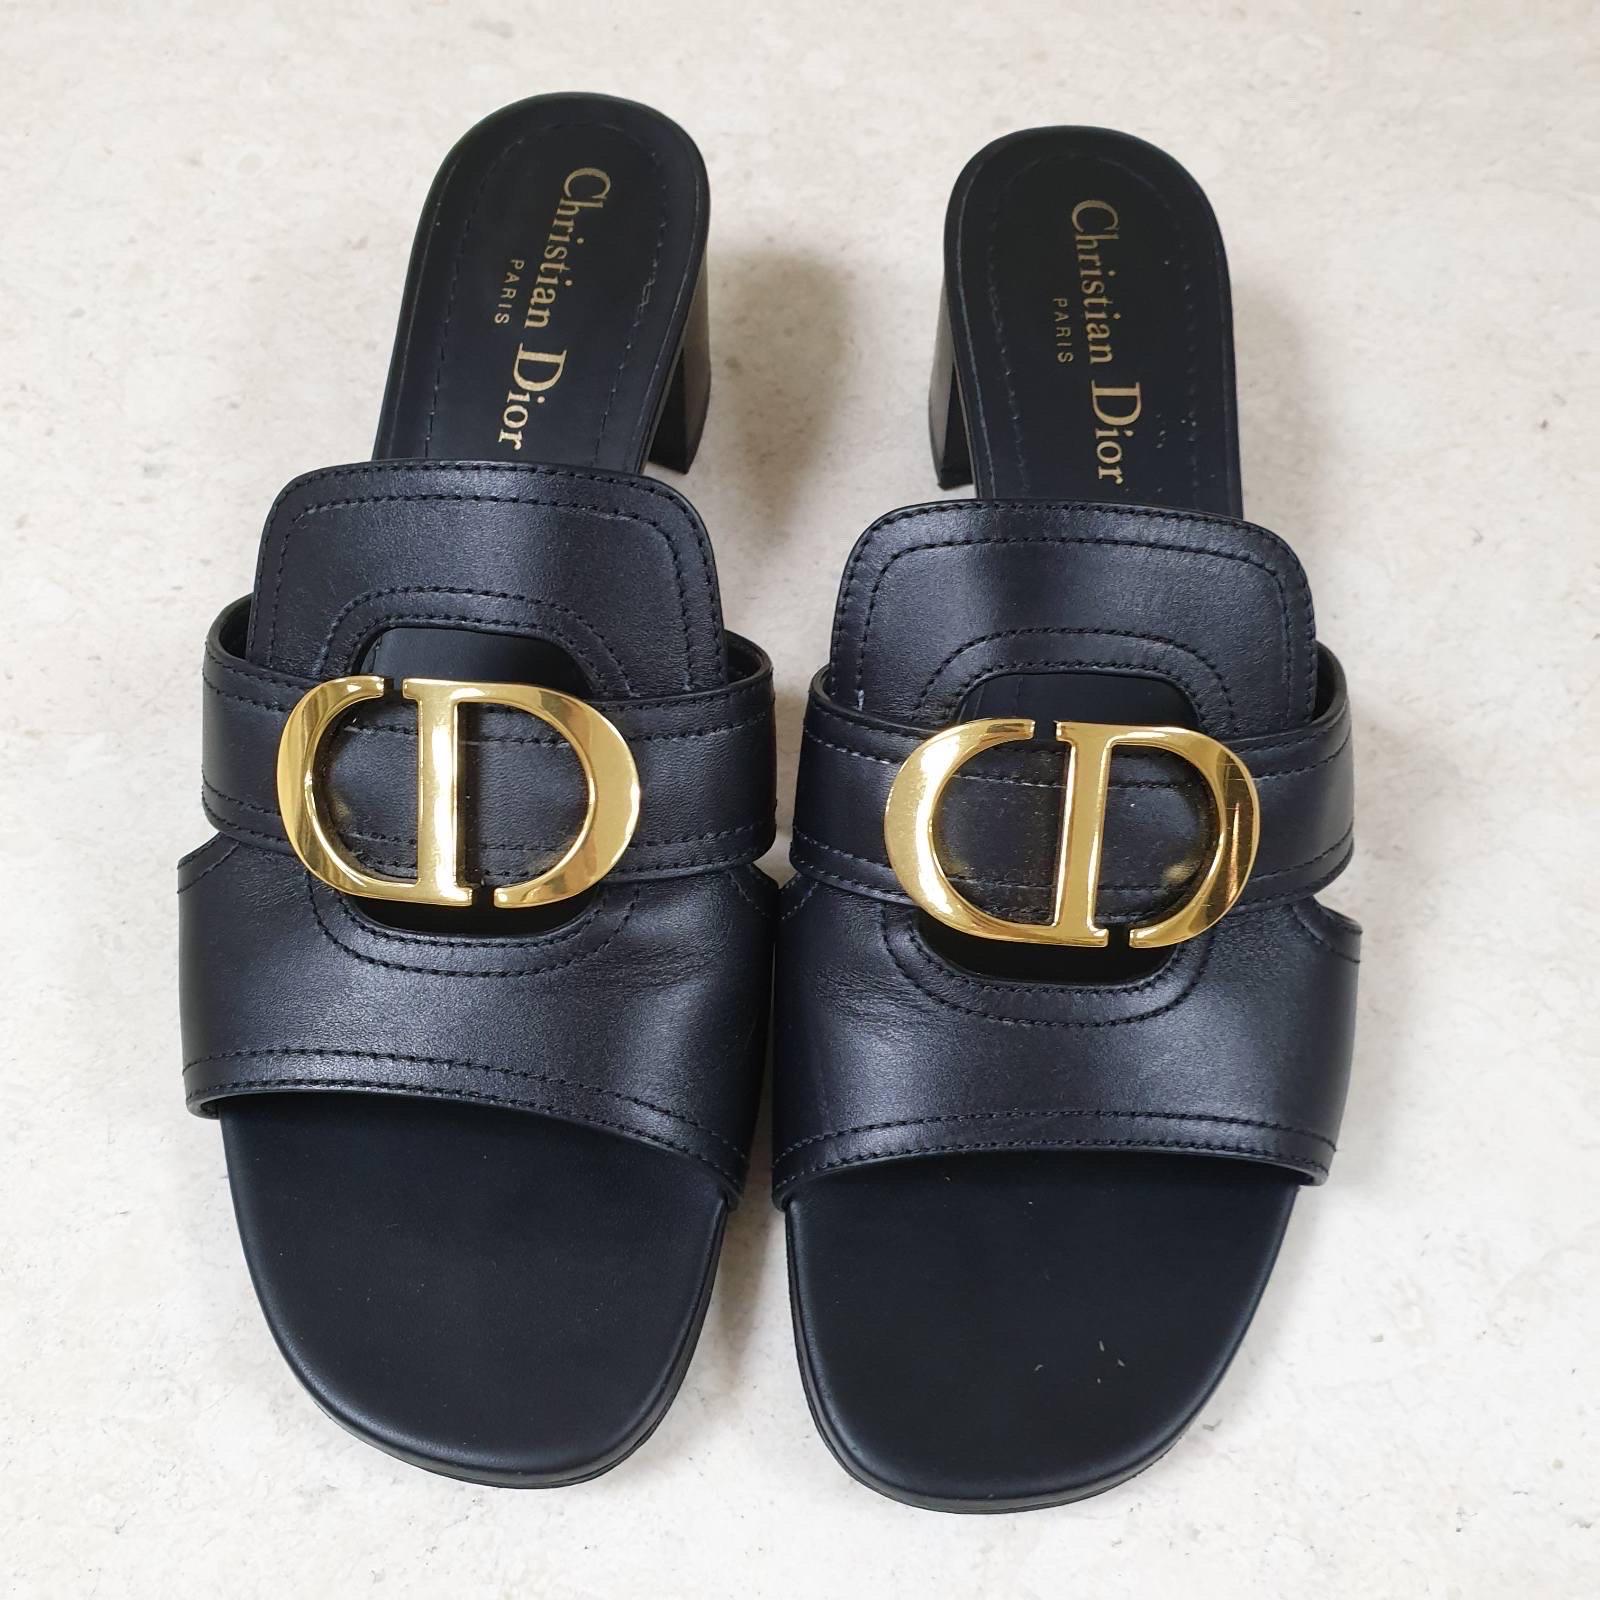 

Stemming from the 30 Montaigne collection, the black leather slide is a key piece for an effortless style. Its upper is adorned with a gold 'CD' accessory, highlighting the beautiful leather work and emblematic quality of the shoe. The mule is set